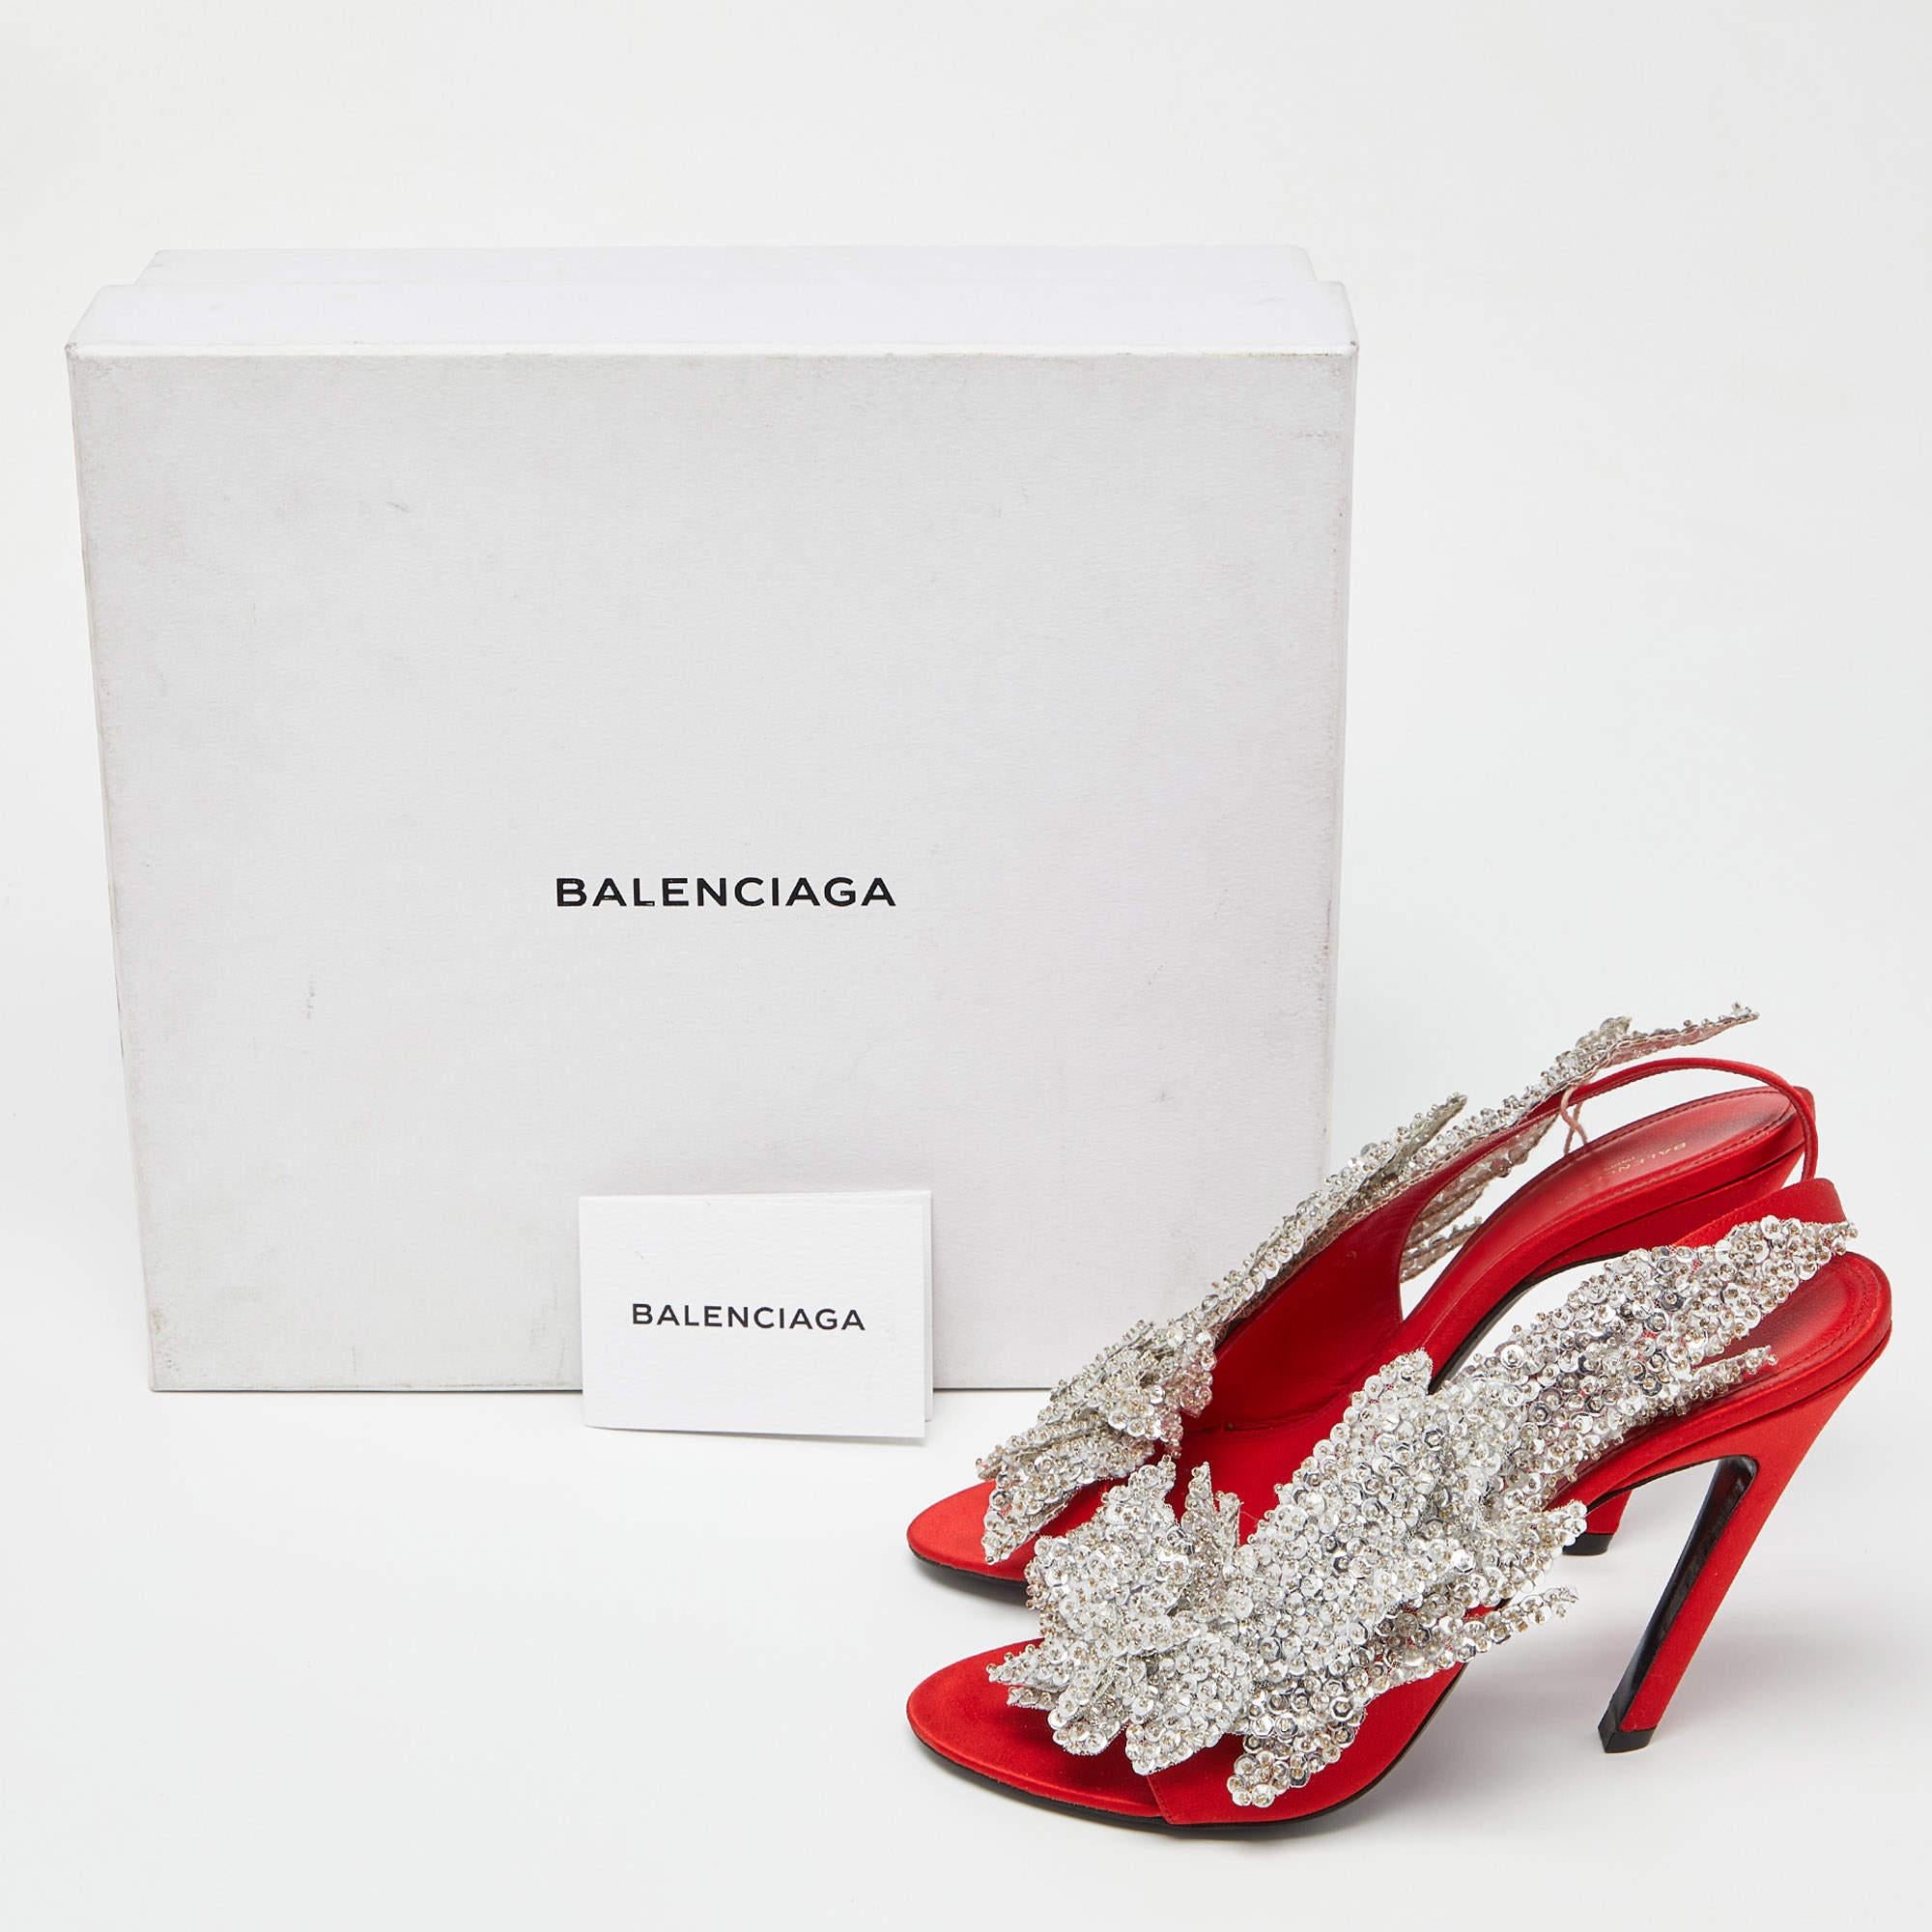 Balenciaga Red Satin Leather Beaded/Sequins Embellished Ankle Strap Sandals Size 4